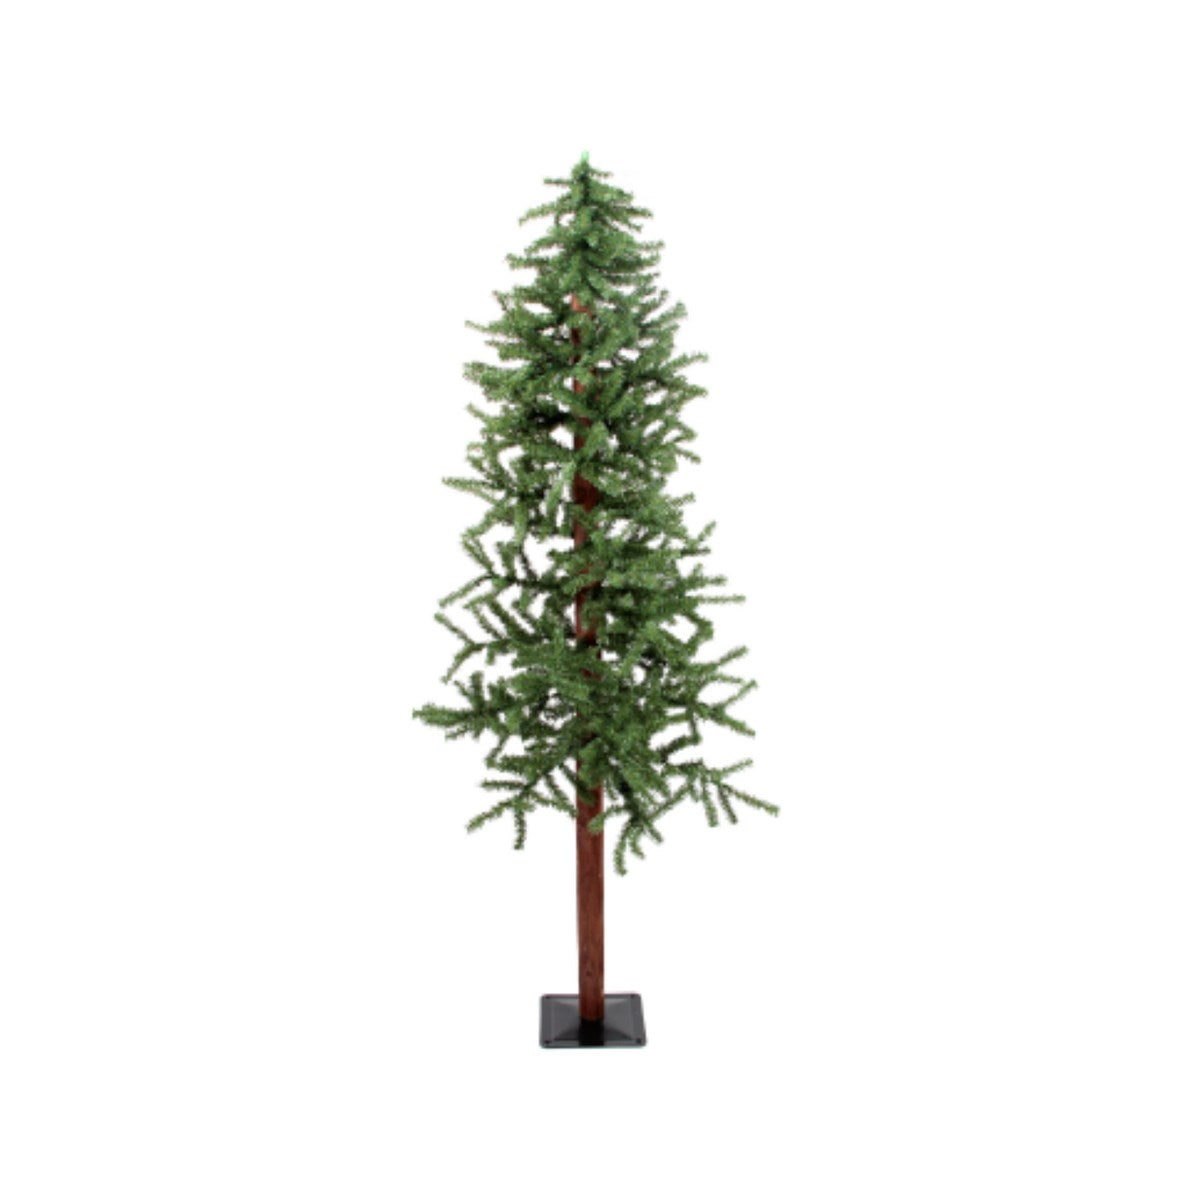 Tall for pine tree/log trunk lge